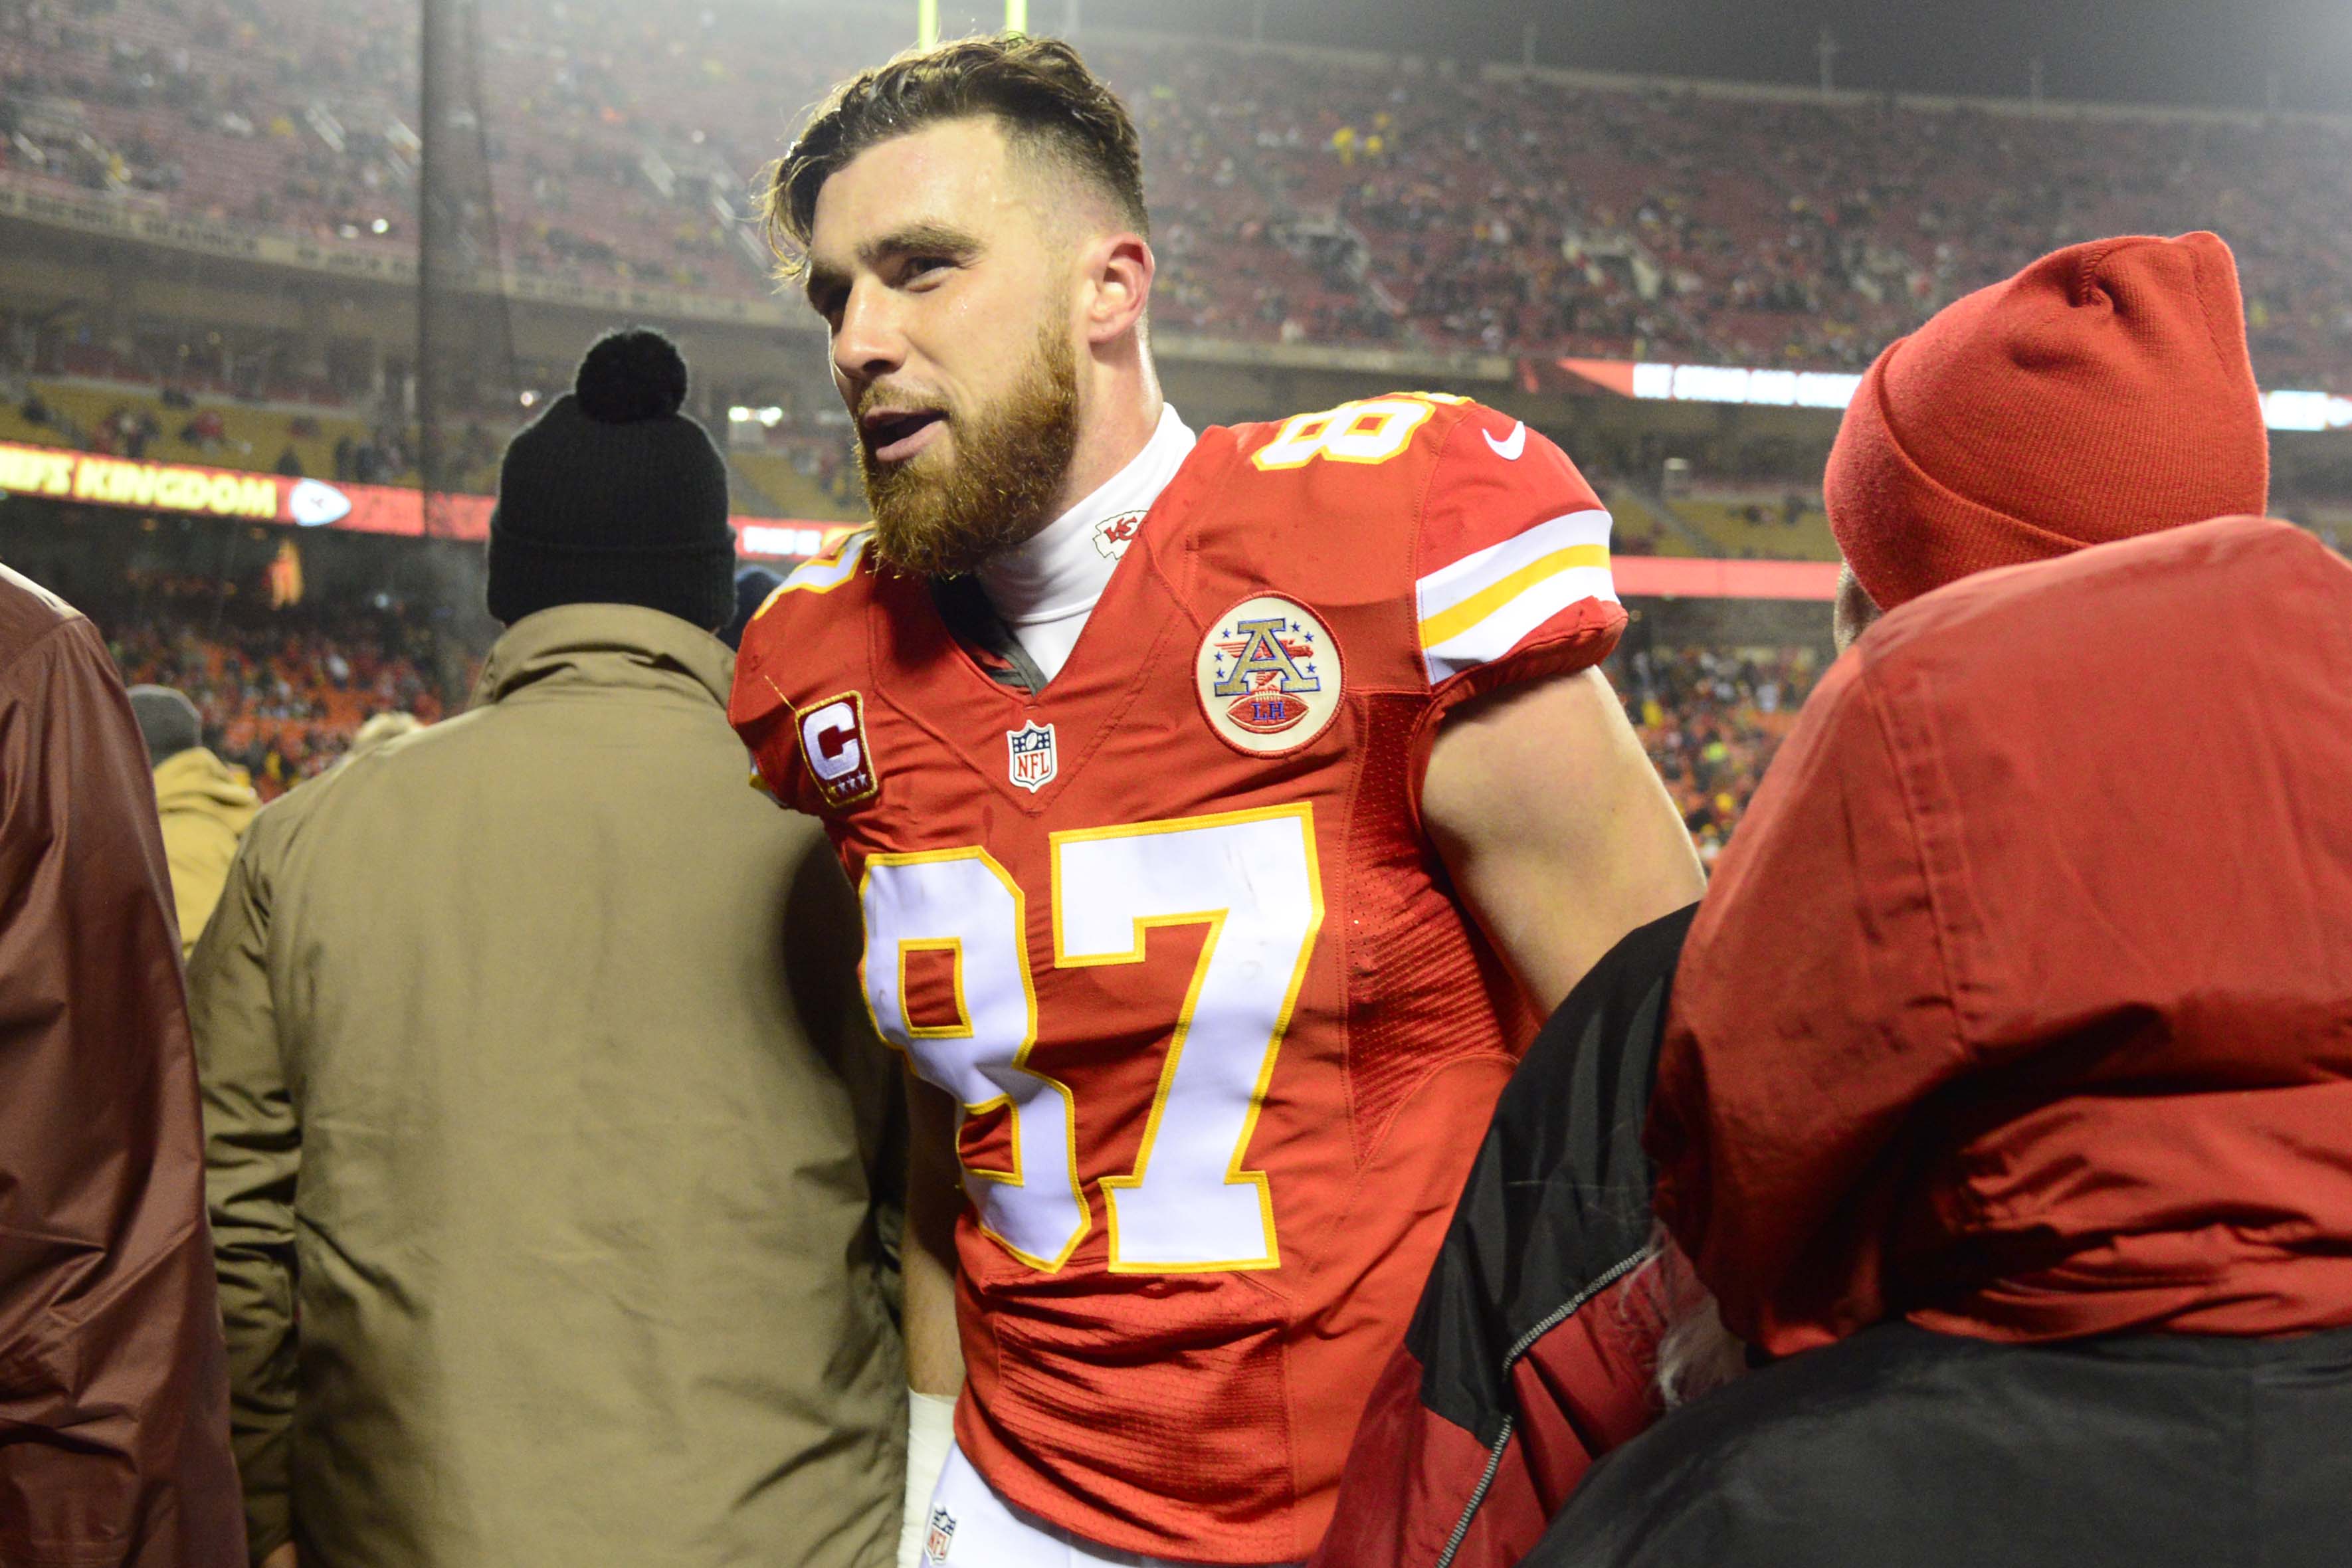 NFL: AFC Divisional-Pittsburgh Steelers at Kansas City Chiefs